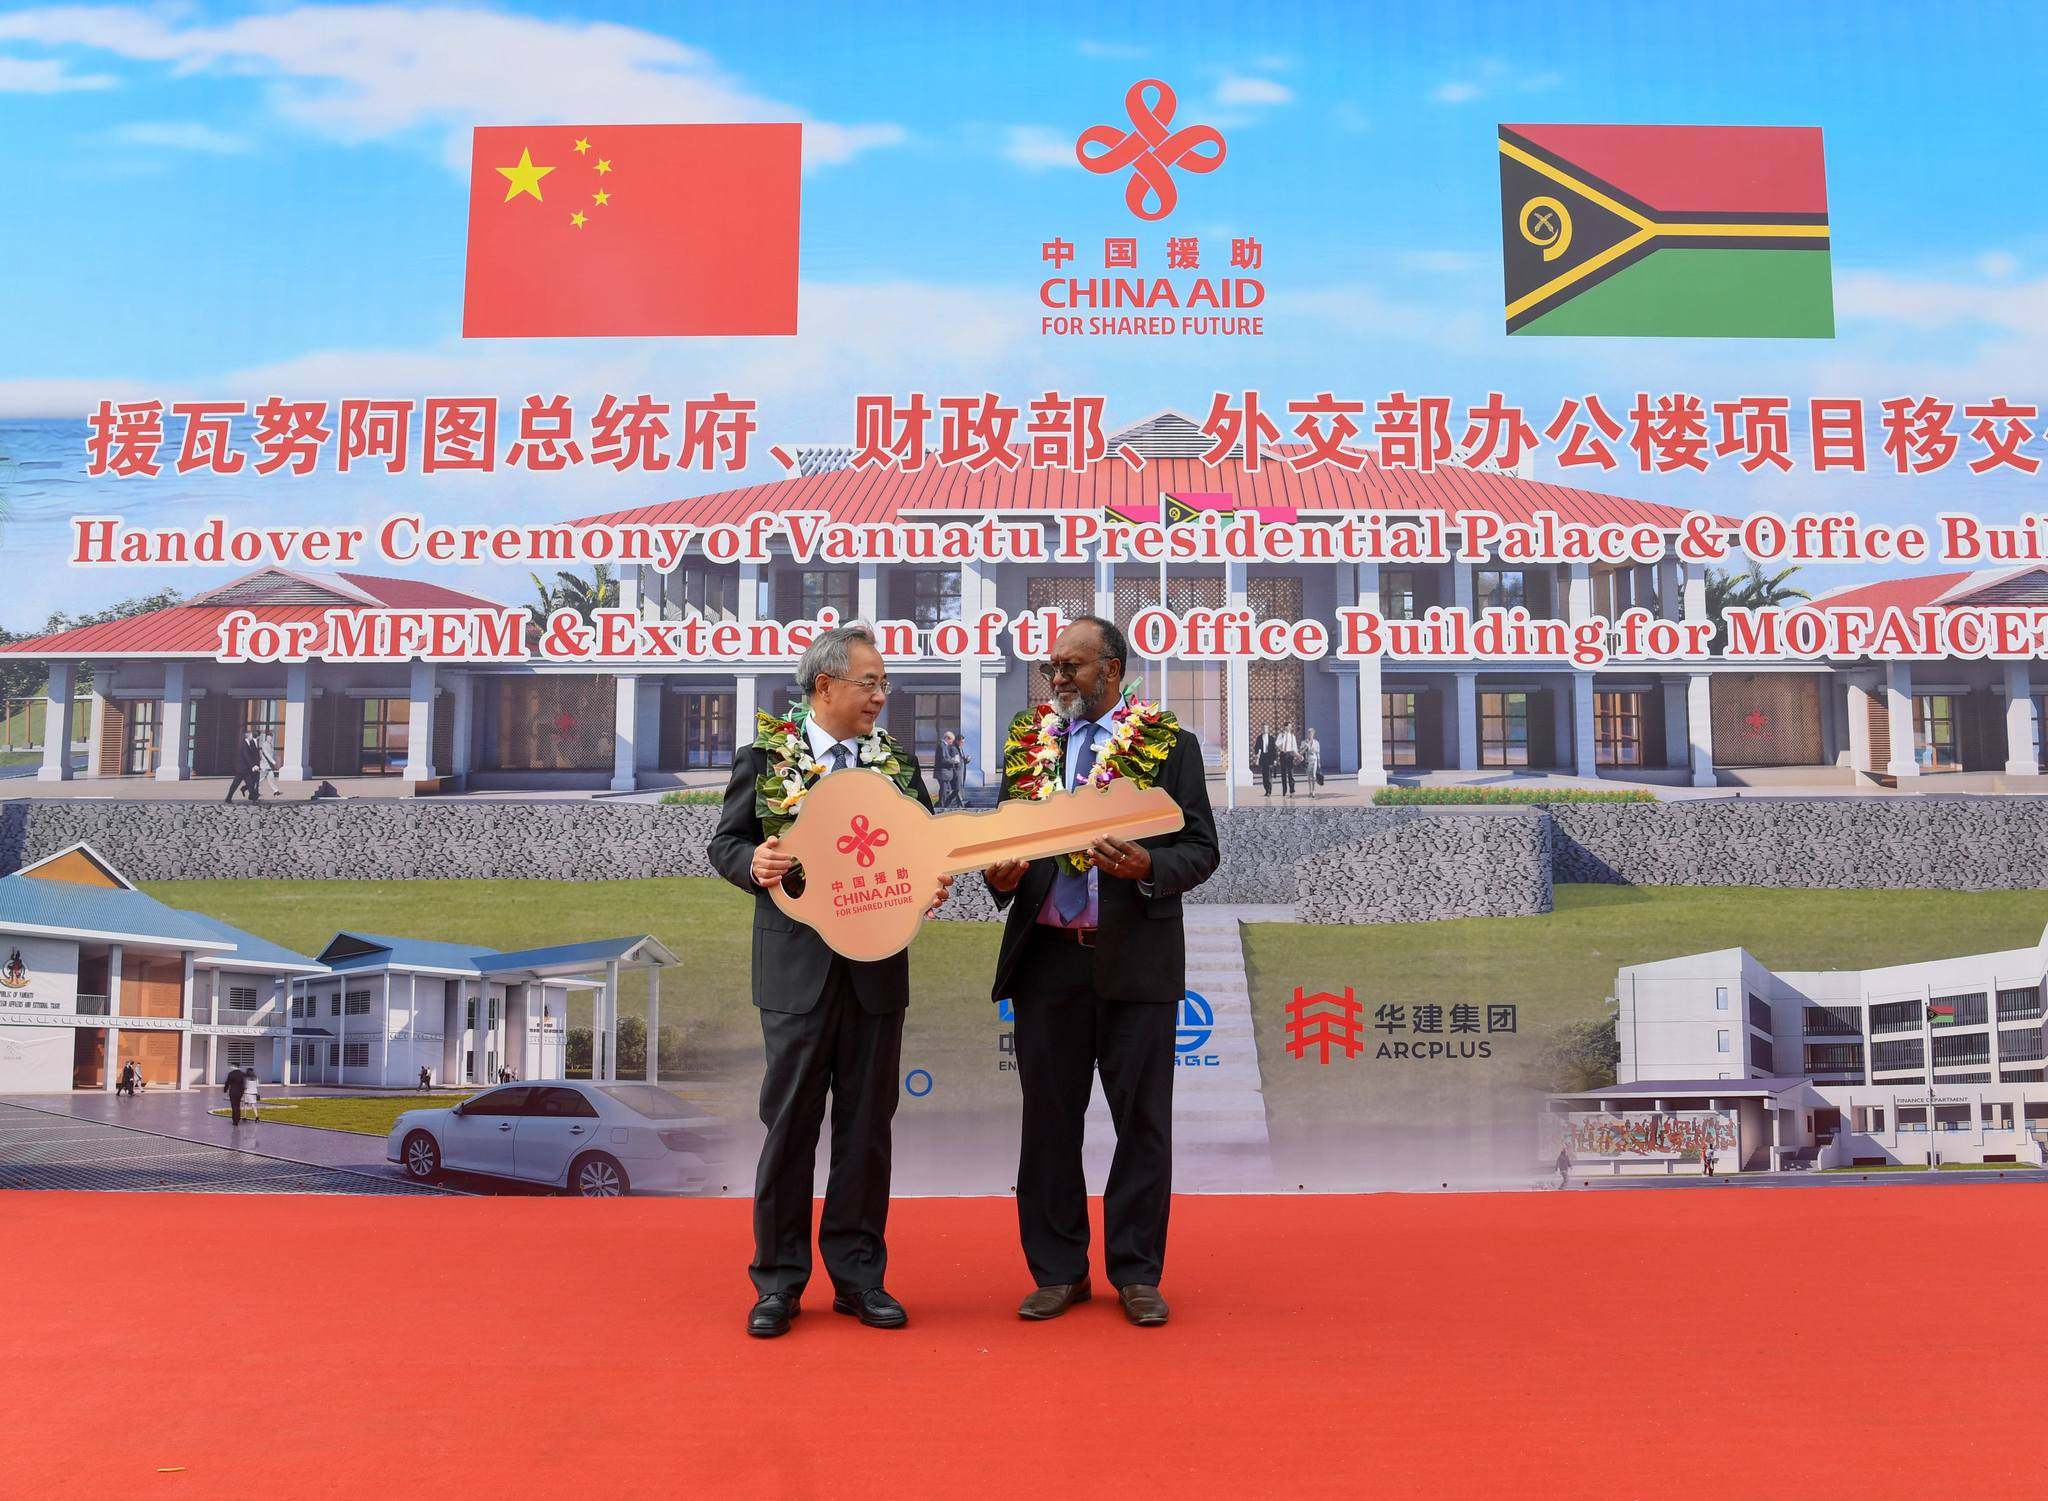 Vanuatu Prime Minister Charlot Salwai receives an oversized novelty golden key to the Pacific nation’s new China-funded presidential palace. Photo: Handout